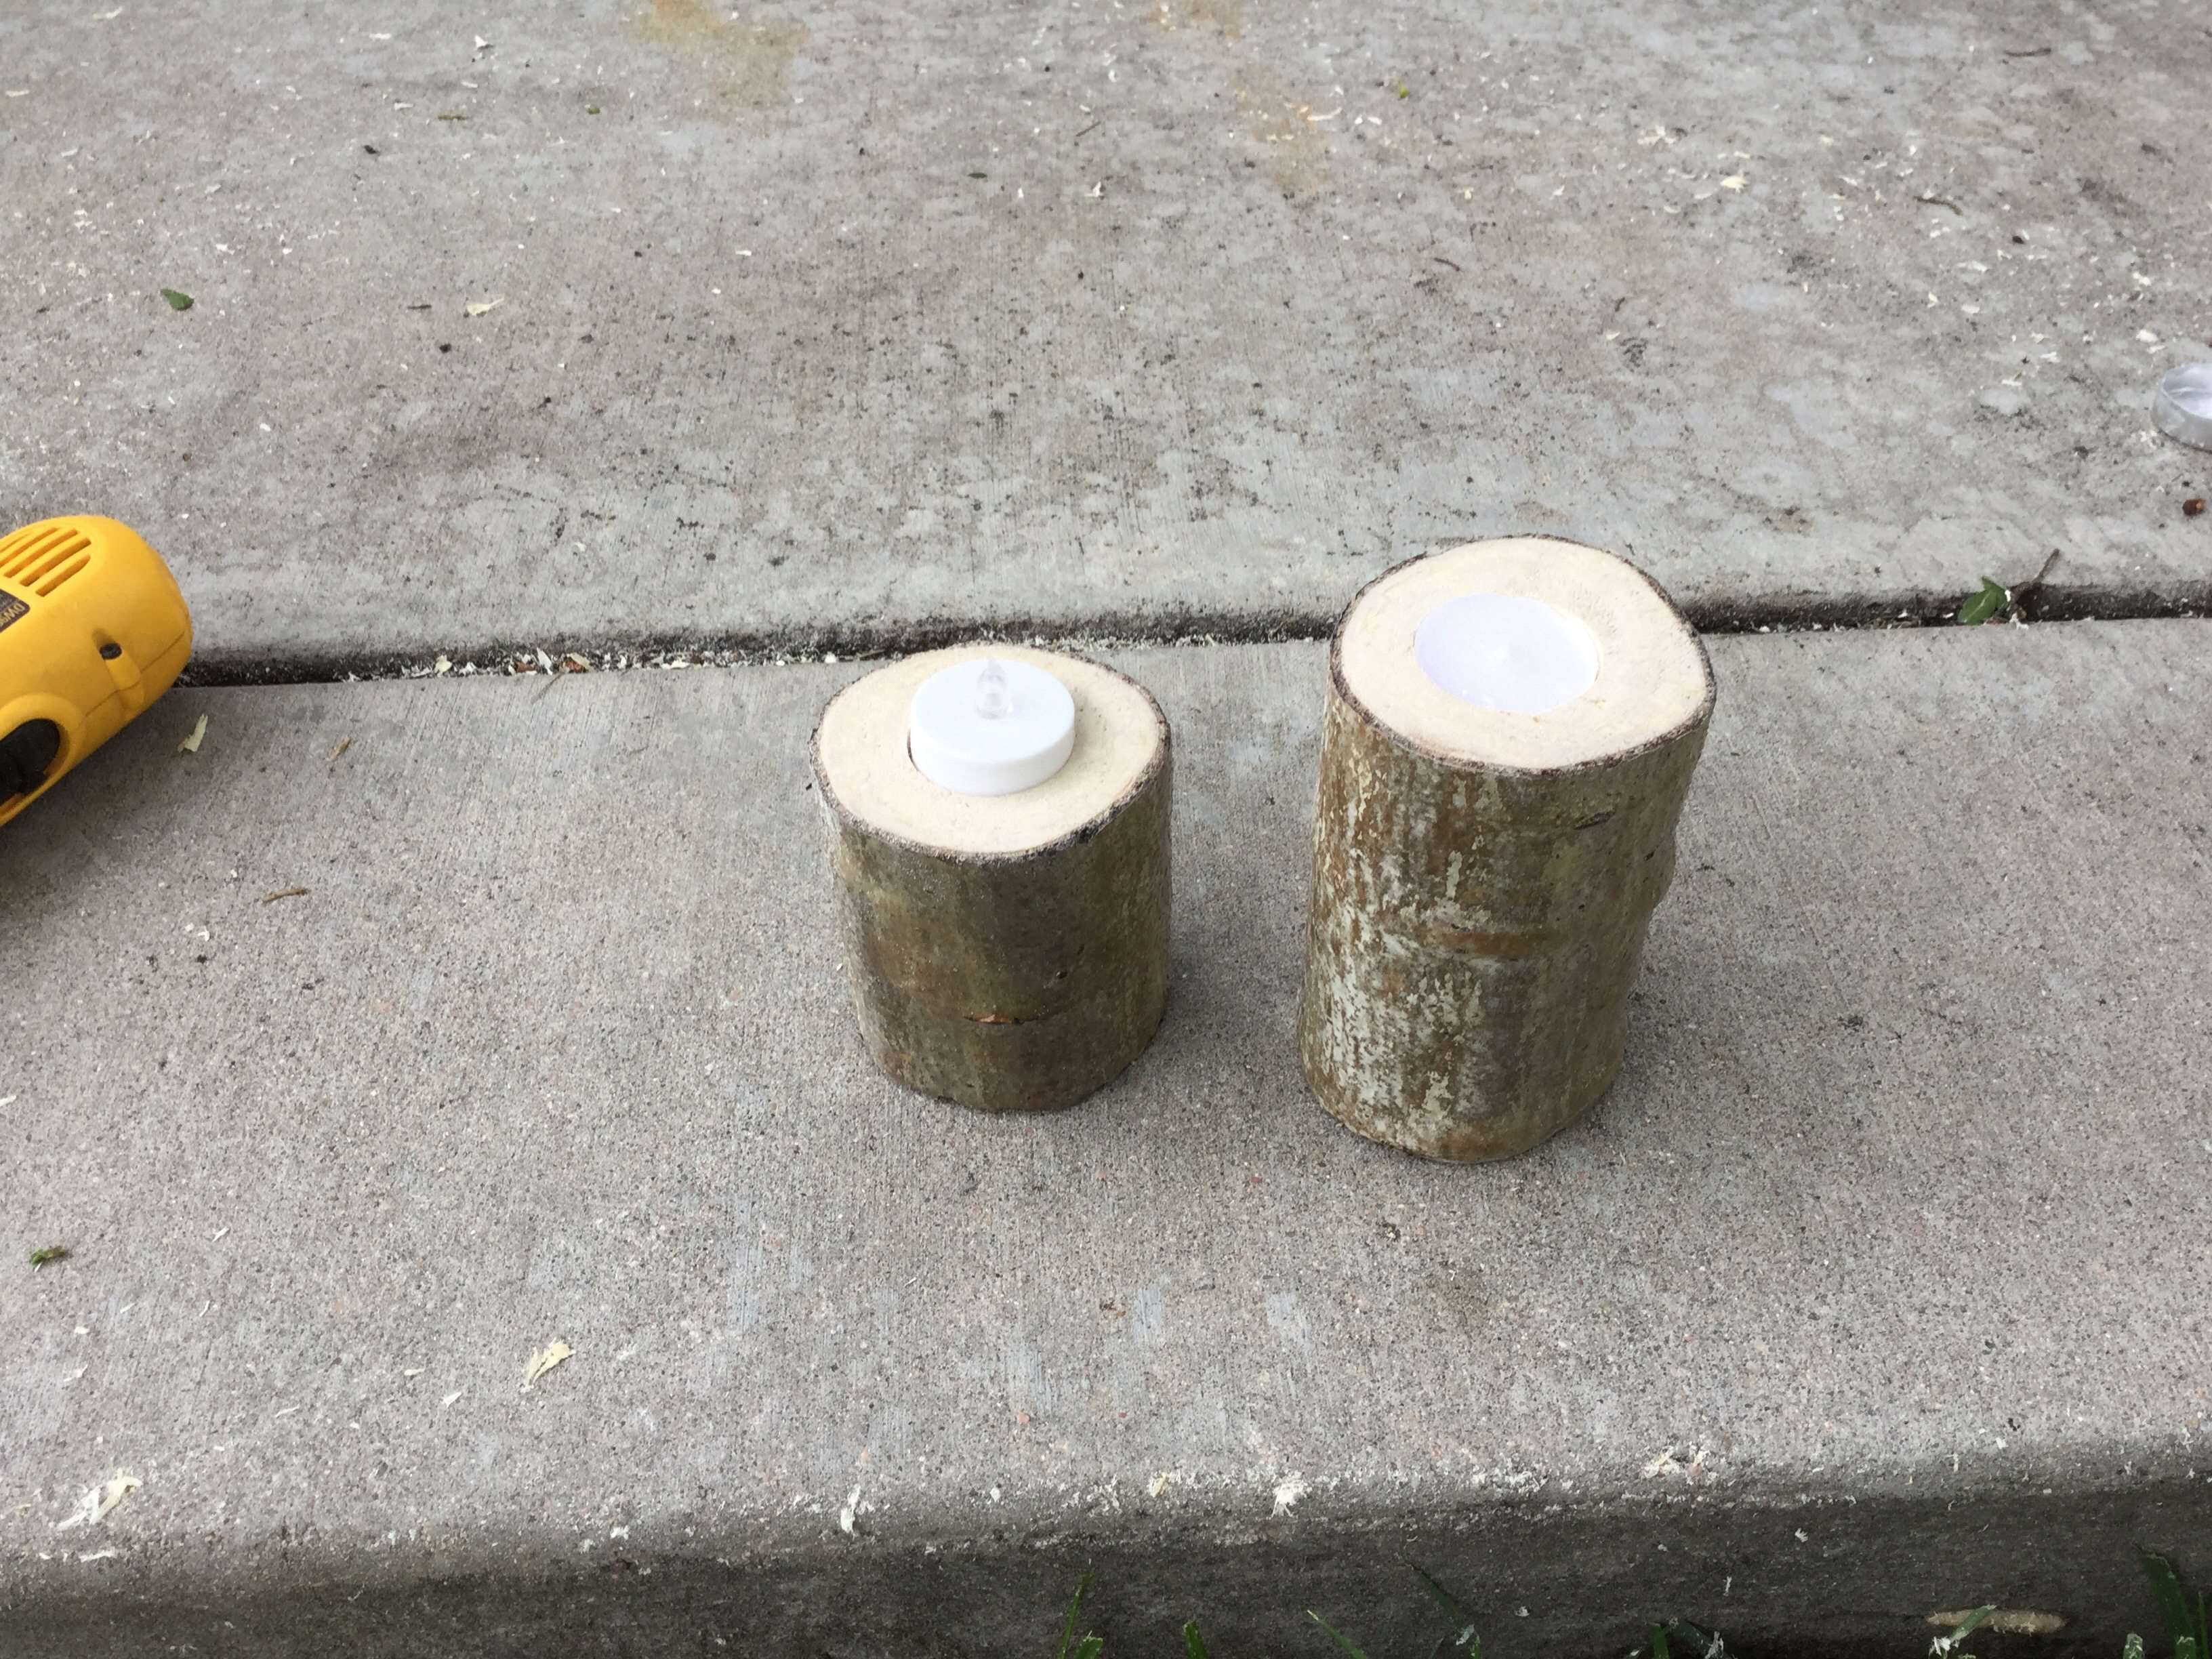 We could have drilled the battery-operated tealight down more but then the candle tealight would have sat down too low and we didn't want the flame that blows in the wood.